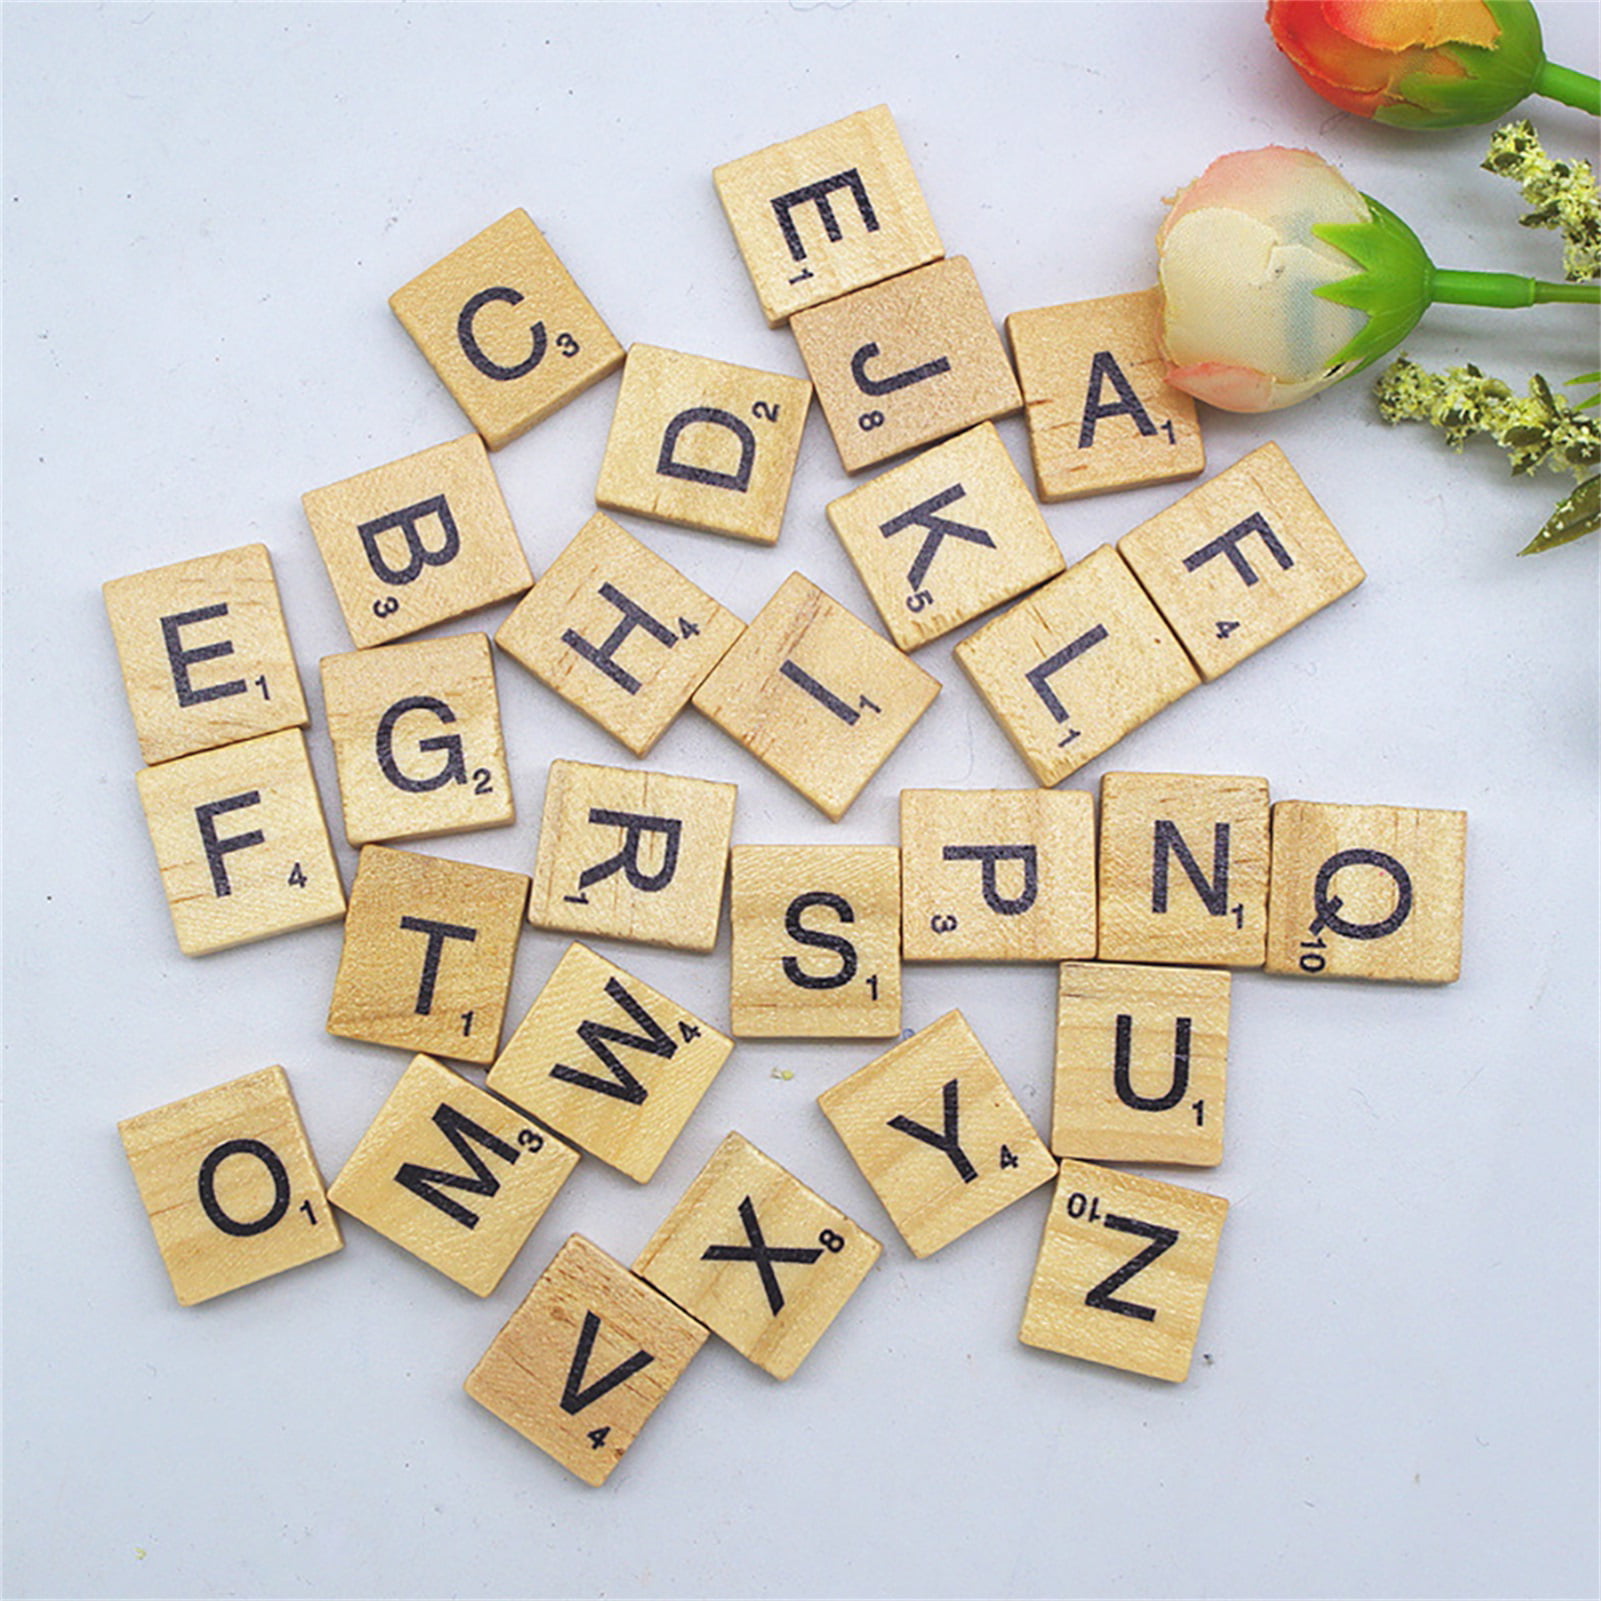 New Children Kids Teaching Learning Letters numbers Fridge Magnets Alphabets M2 